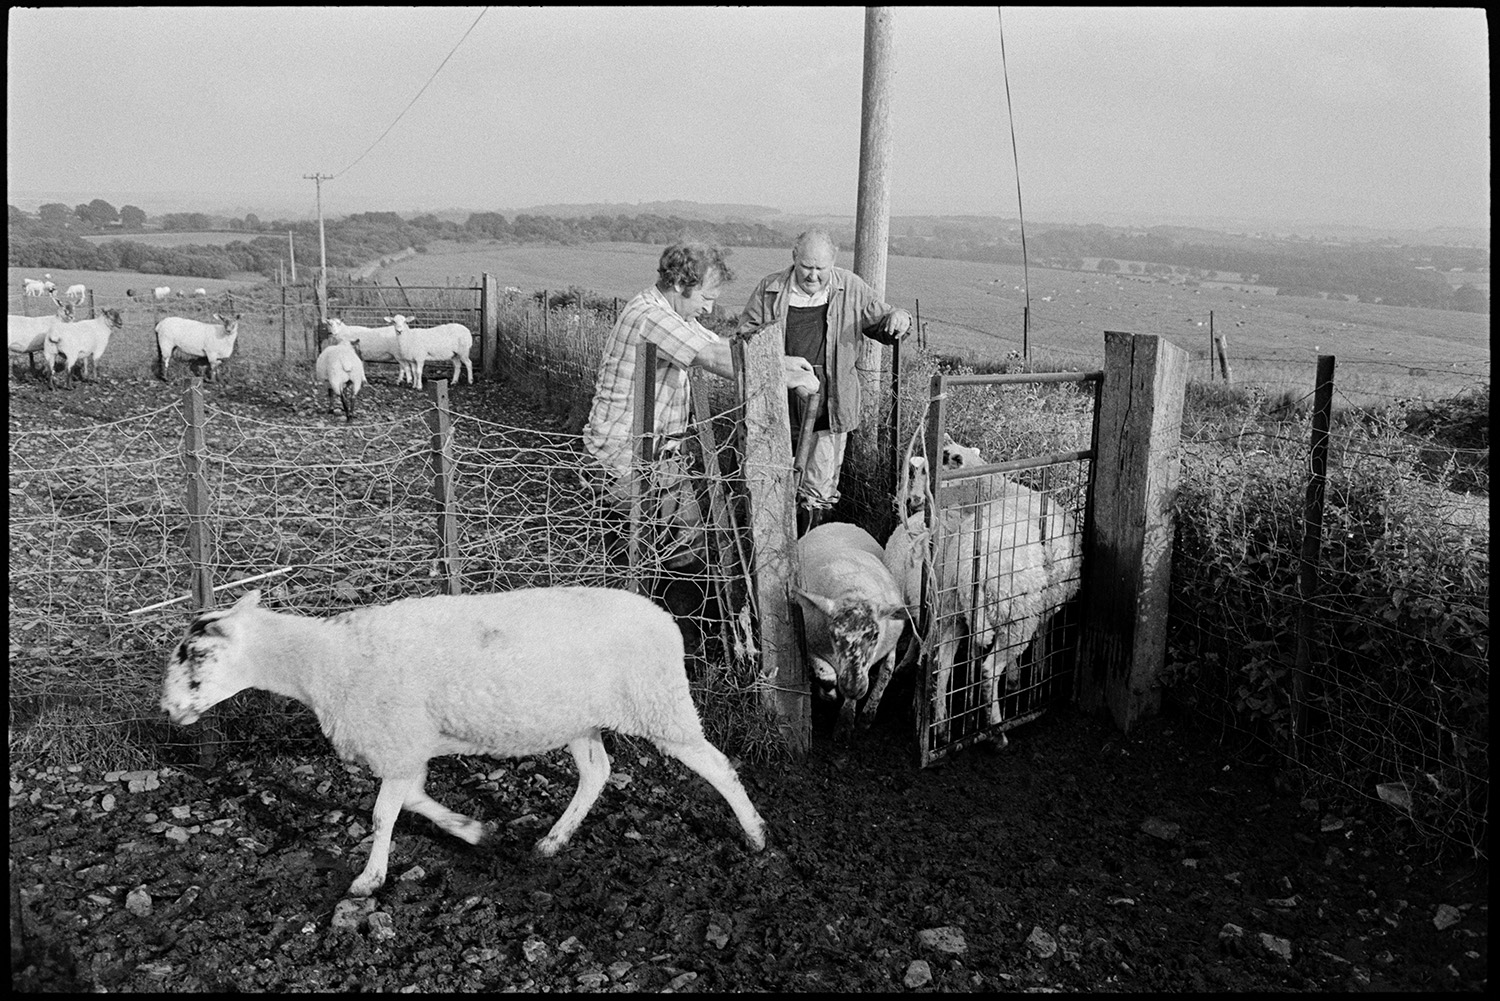 Farmers checking sheep on moor. 
[Two men checking sheep in wire pens on Hatherleigh Moor. A landscape of fields and trees can be seen in the background.]